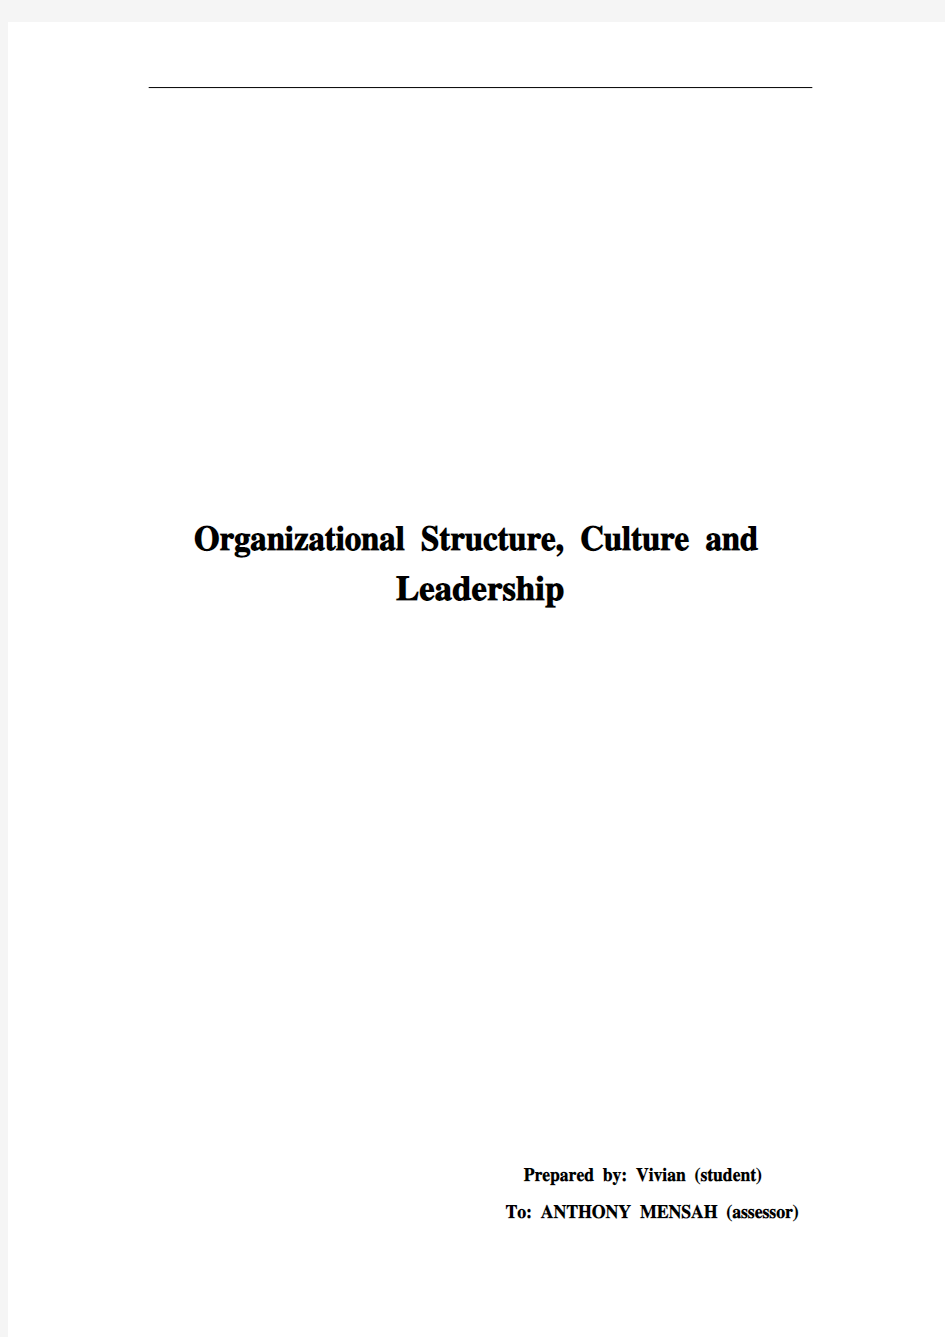 Organizational Structure, Culture and Leadership